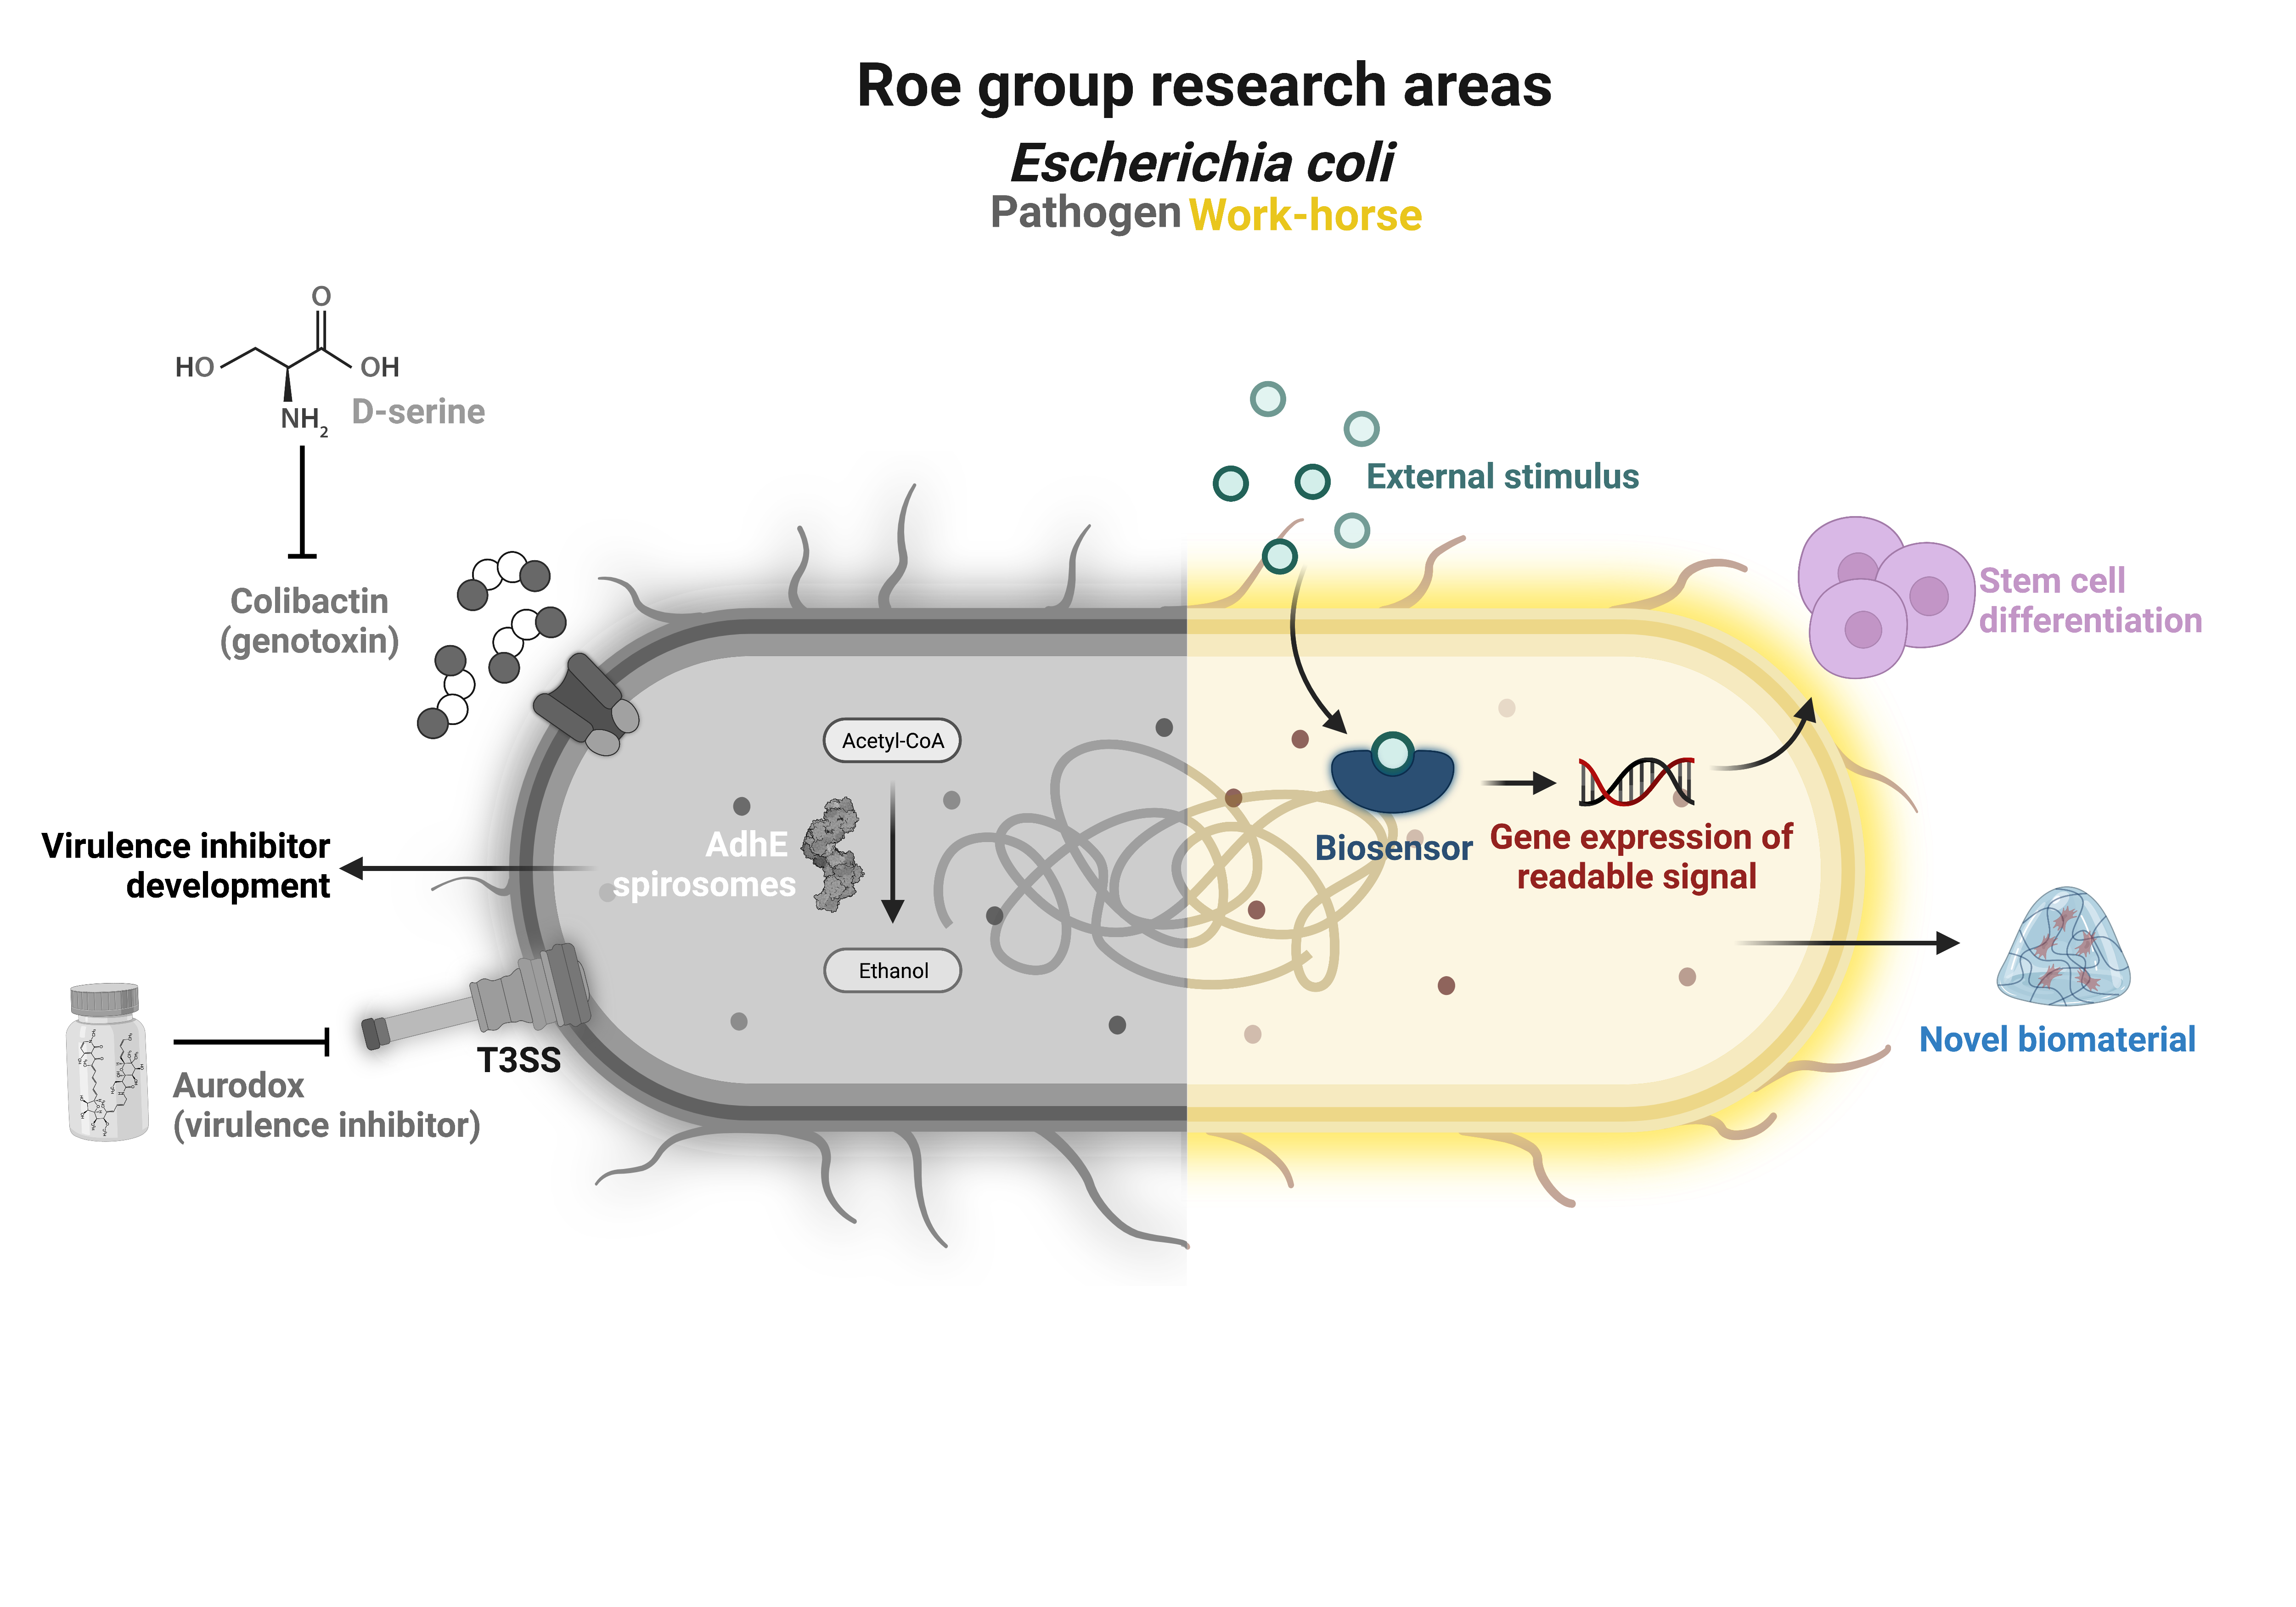 Image showing the research areas of the Roe group that focus on E.coli as a workhorse